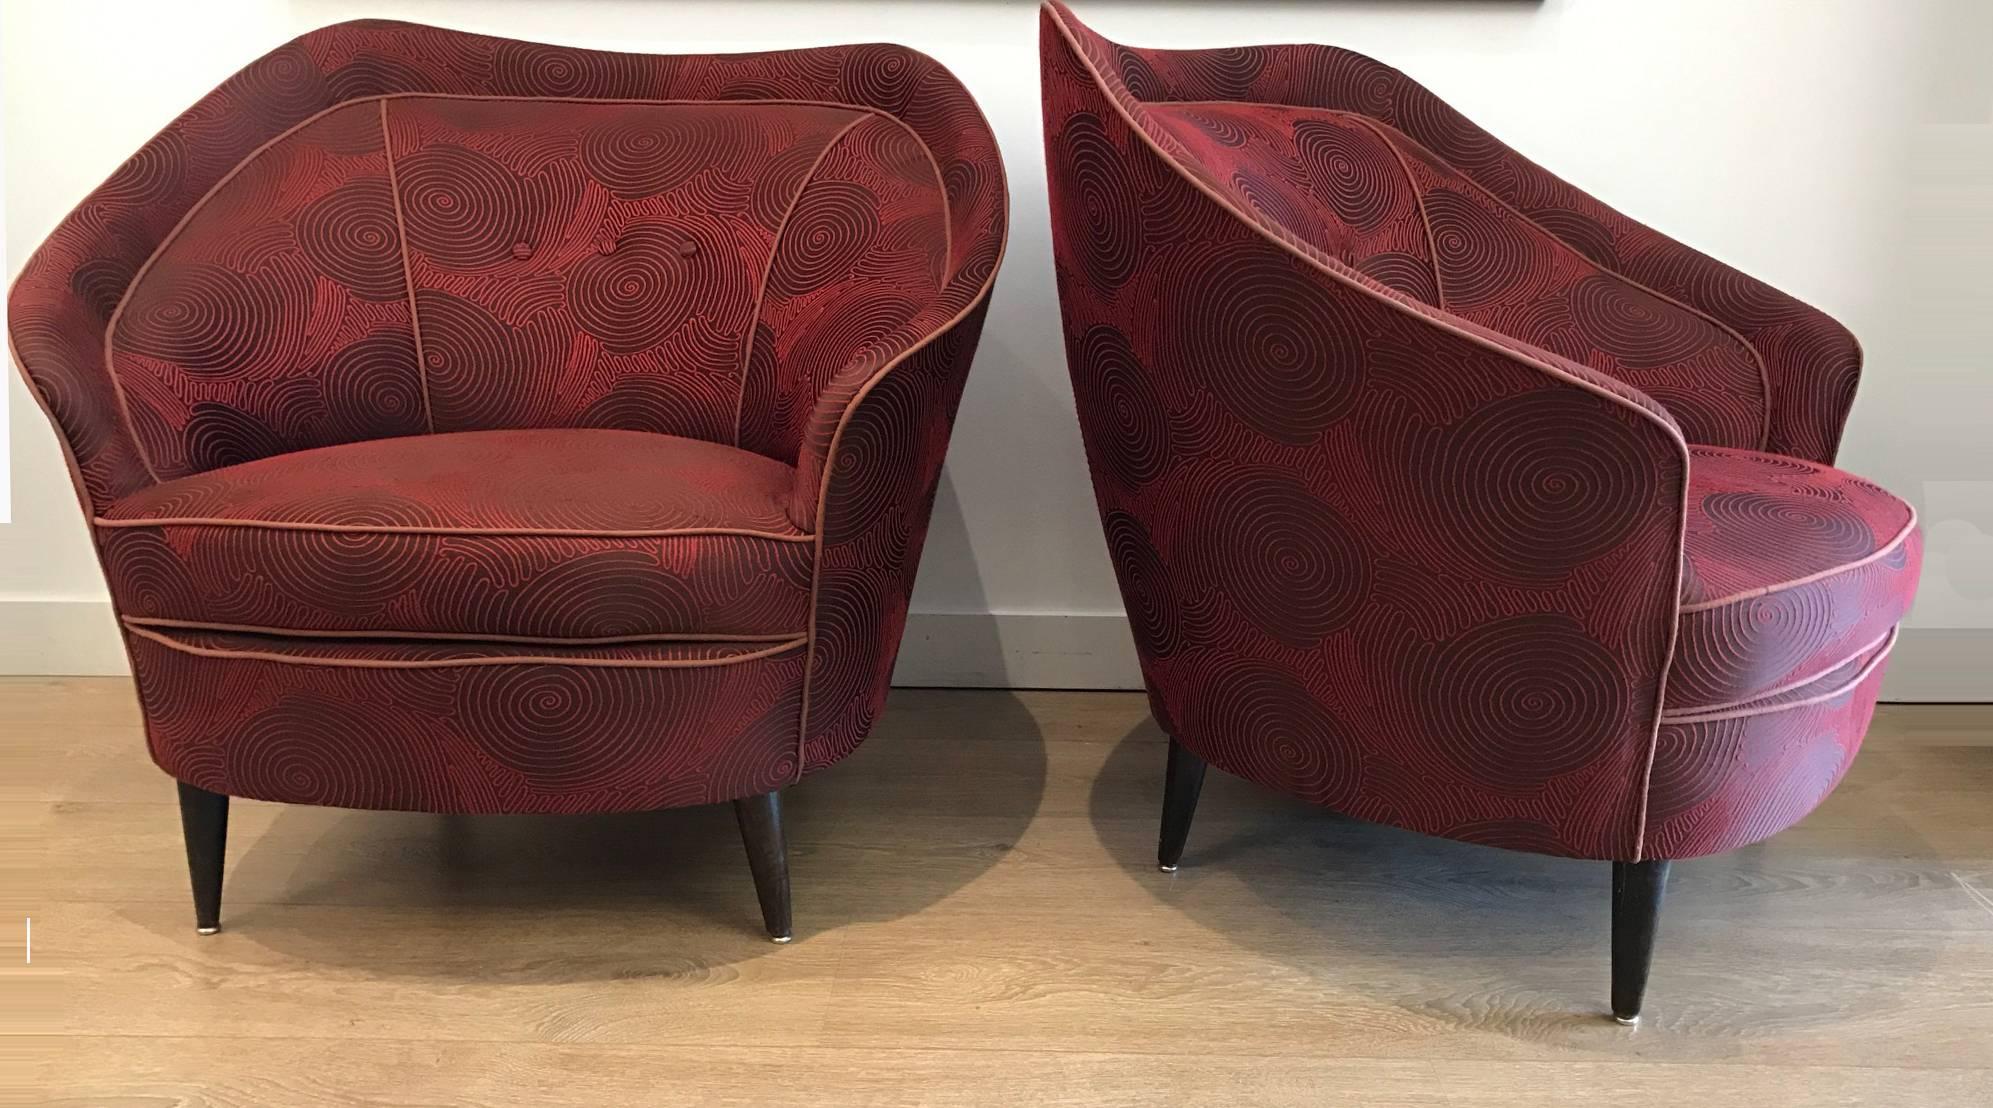 Pair of Italian Mid-Century lounge chairs. The overall design is reminiscent of the work of Gio Ponti for Casa e Giardino production. Newly upholstered, wooden conical legs.

For additional questions regarding this item, please click the